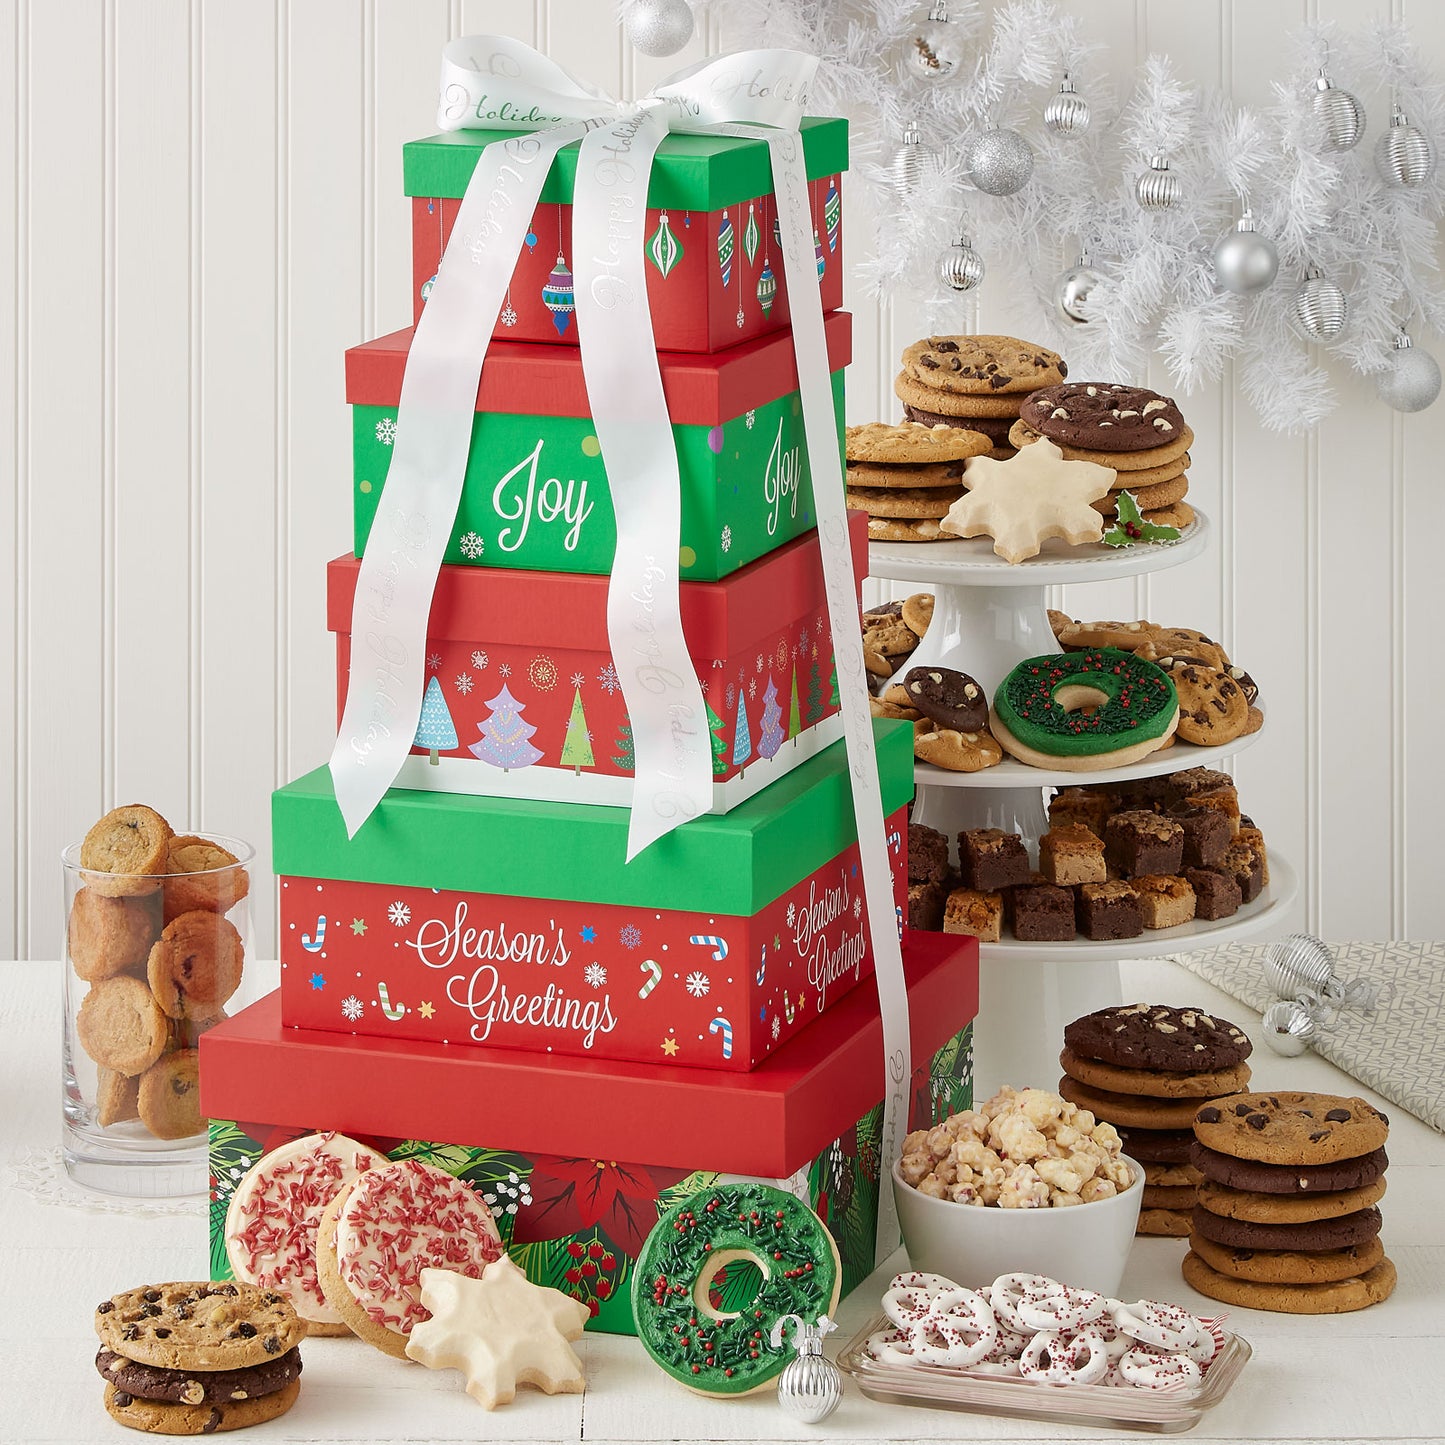 A red and green five-tier tower tied with a white Mrs. Fields ribbon and surrounded by an assortment of Nibblers®, original cookies, brownie bites, two frosted wreath cookies with sprinkles, two frosted peppermint cookies with sprinkles, two frosted snowflake cookies, popcorn, muffins, and yogurt-covered pretzels.